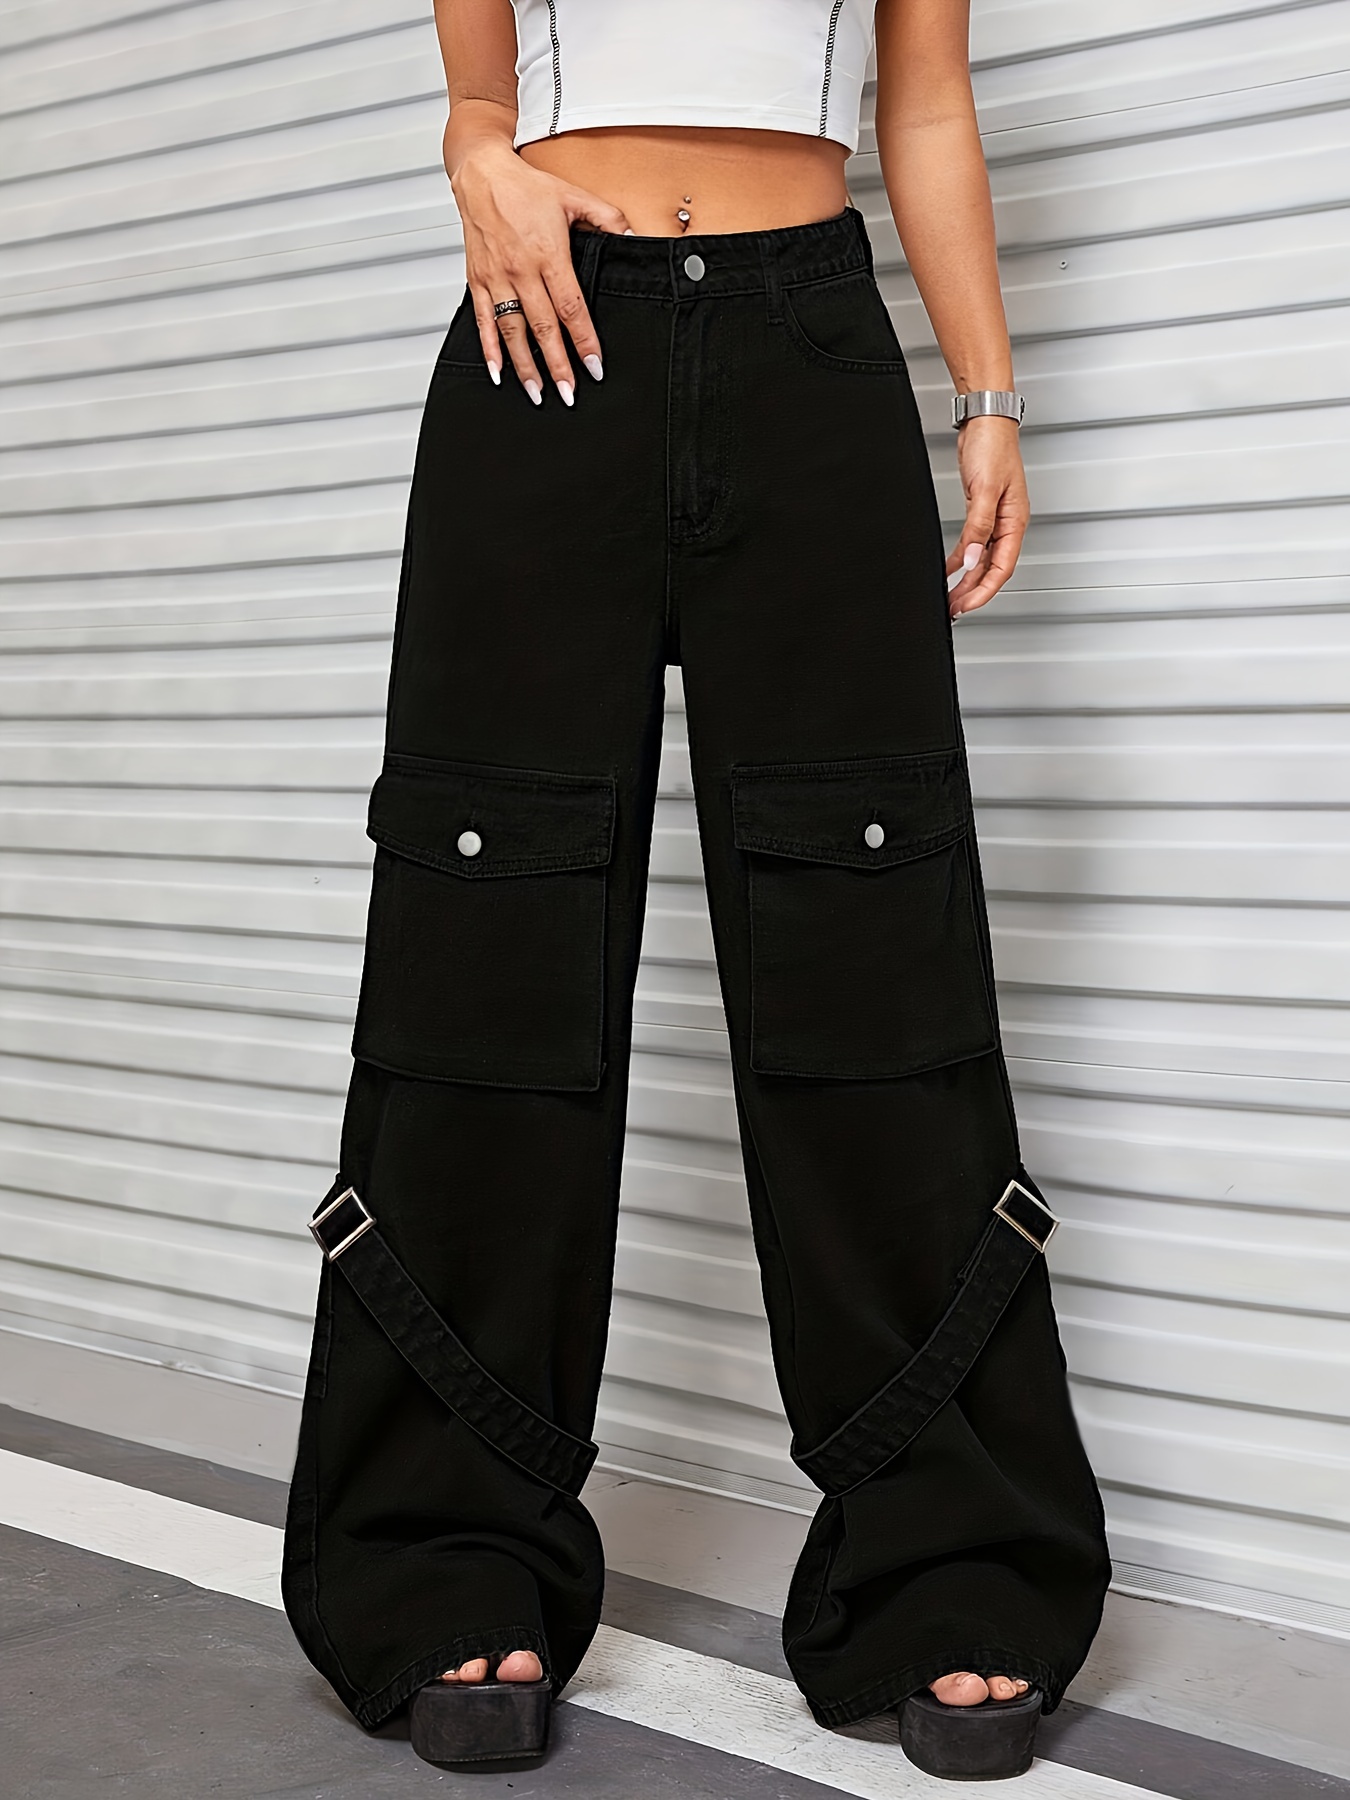 Black Flap Pockets Straight Jeans, Loose Fit Non-Stretch High Waist Cargo  Pants, Y2K & Kpop Style, Women's Denim Jeans & Clothing